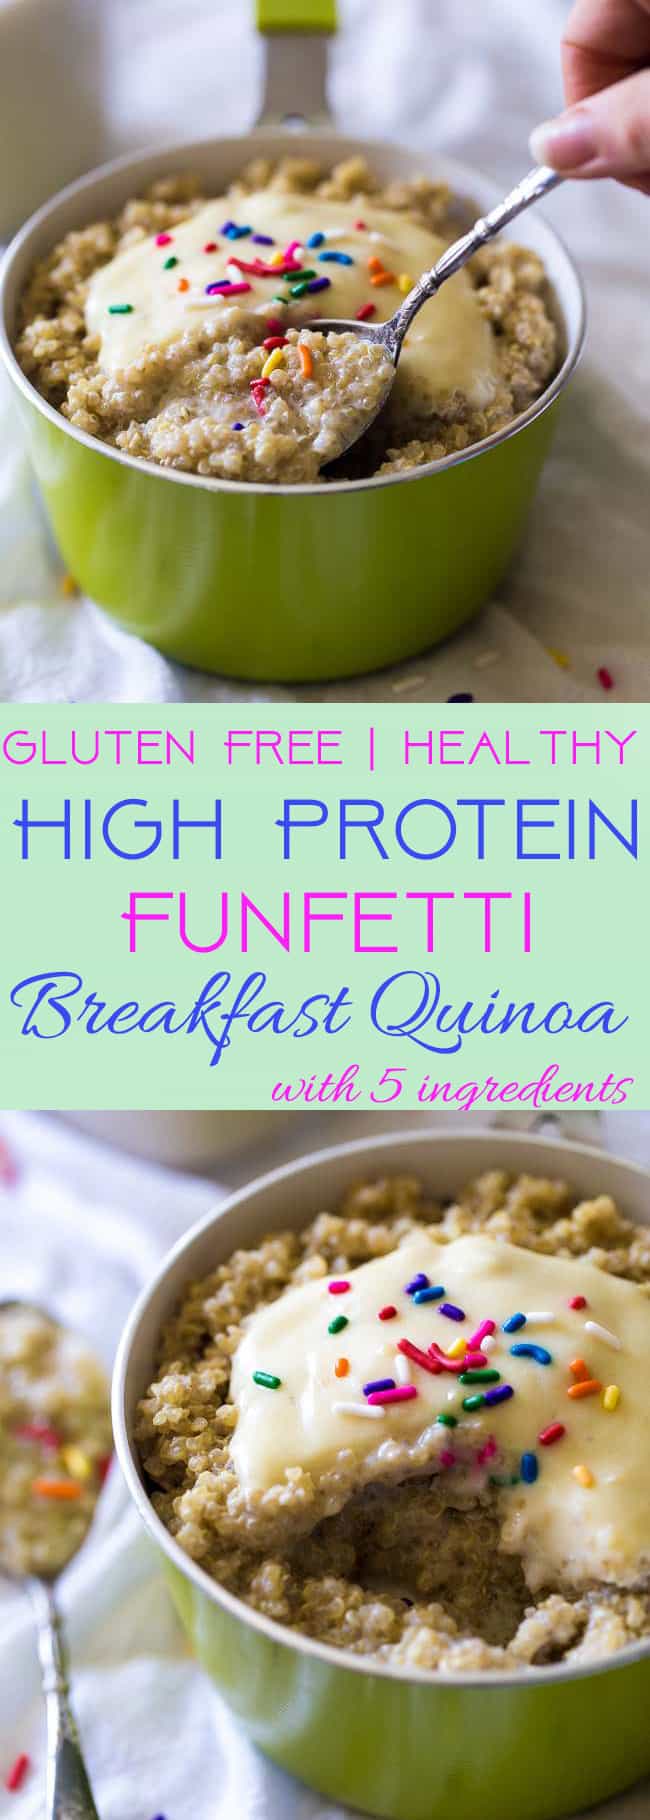 Funfetti Breakfast Quinoa - Because who doesn't want healthy cake for breakfast?! Easy, gluten free and protein packed! | Foodfaithfitness.com | @FoodFaithFit | healthy breakfast quinoa. breakfast ideas for kids. breakfast quinoa with almond milk. protein breakfast quinoa. healthy breakfast ideas. breakfast meal prep. high protein breakfast recipes.